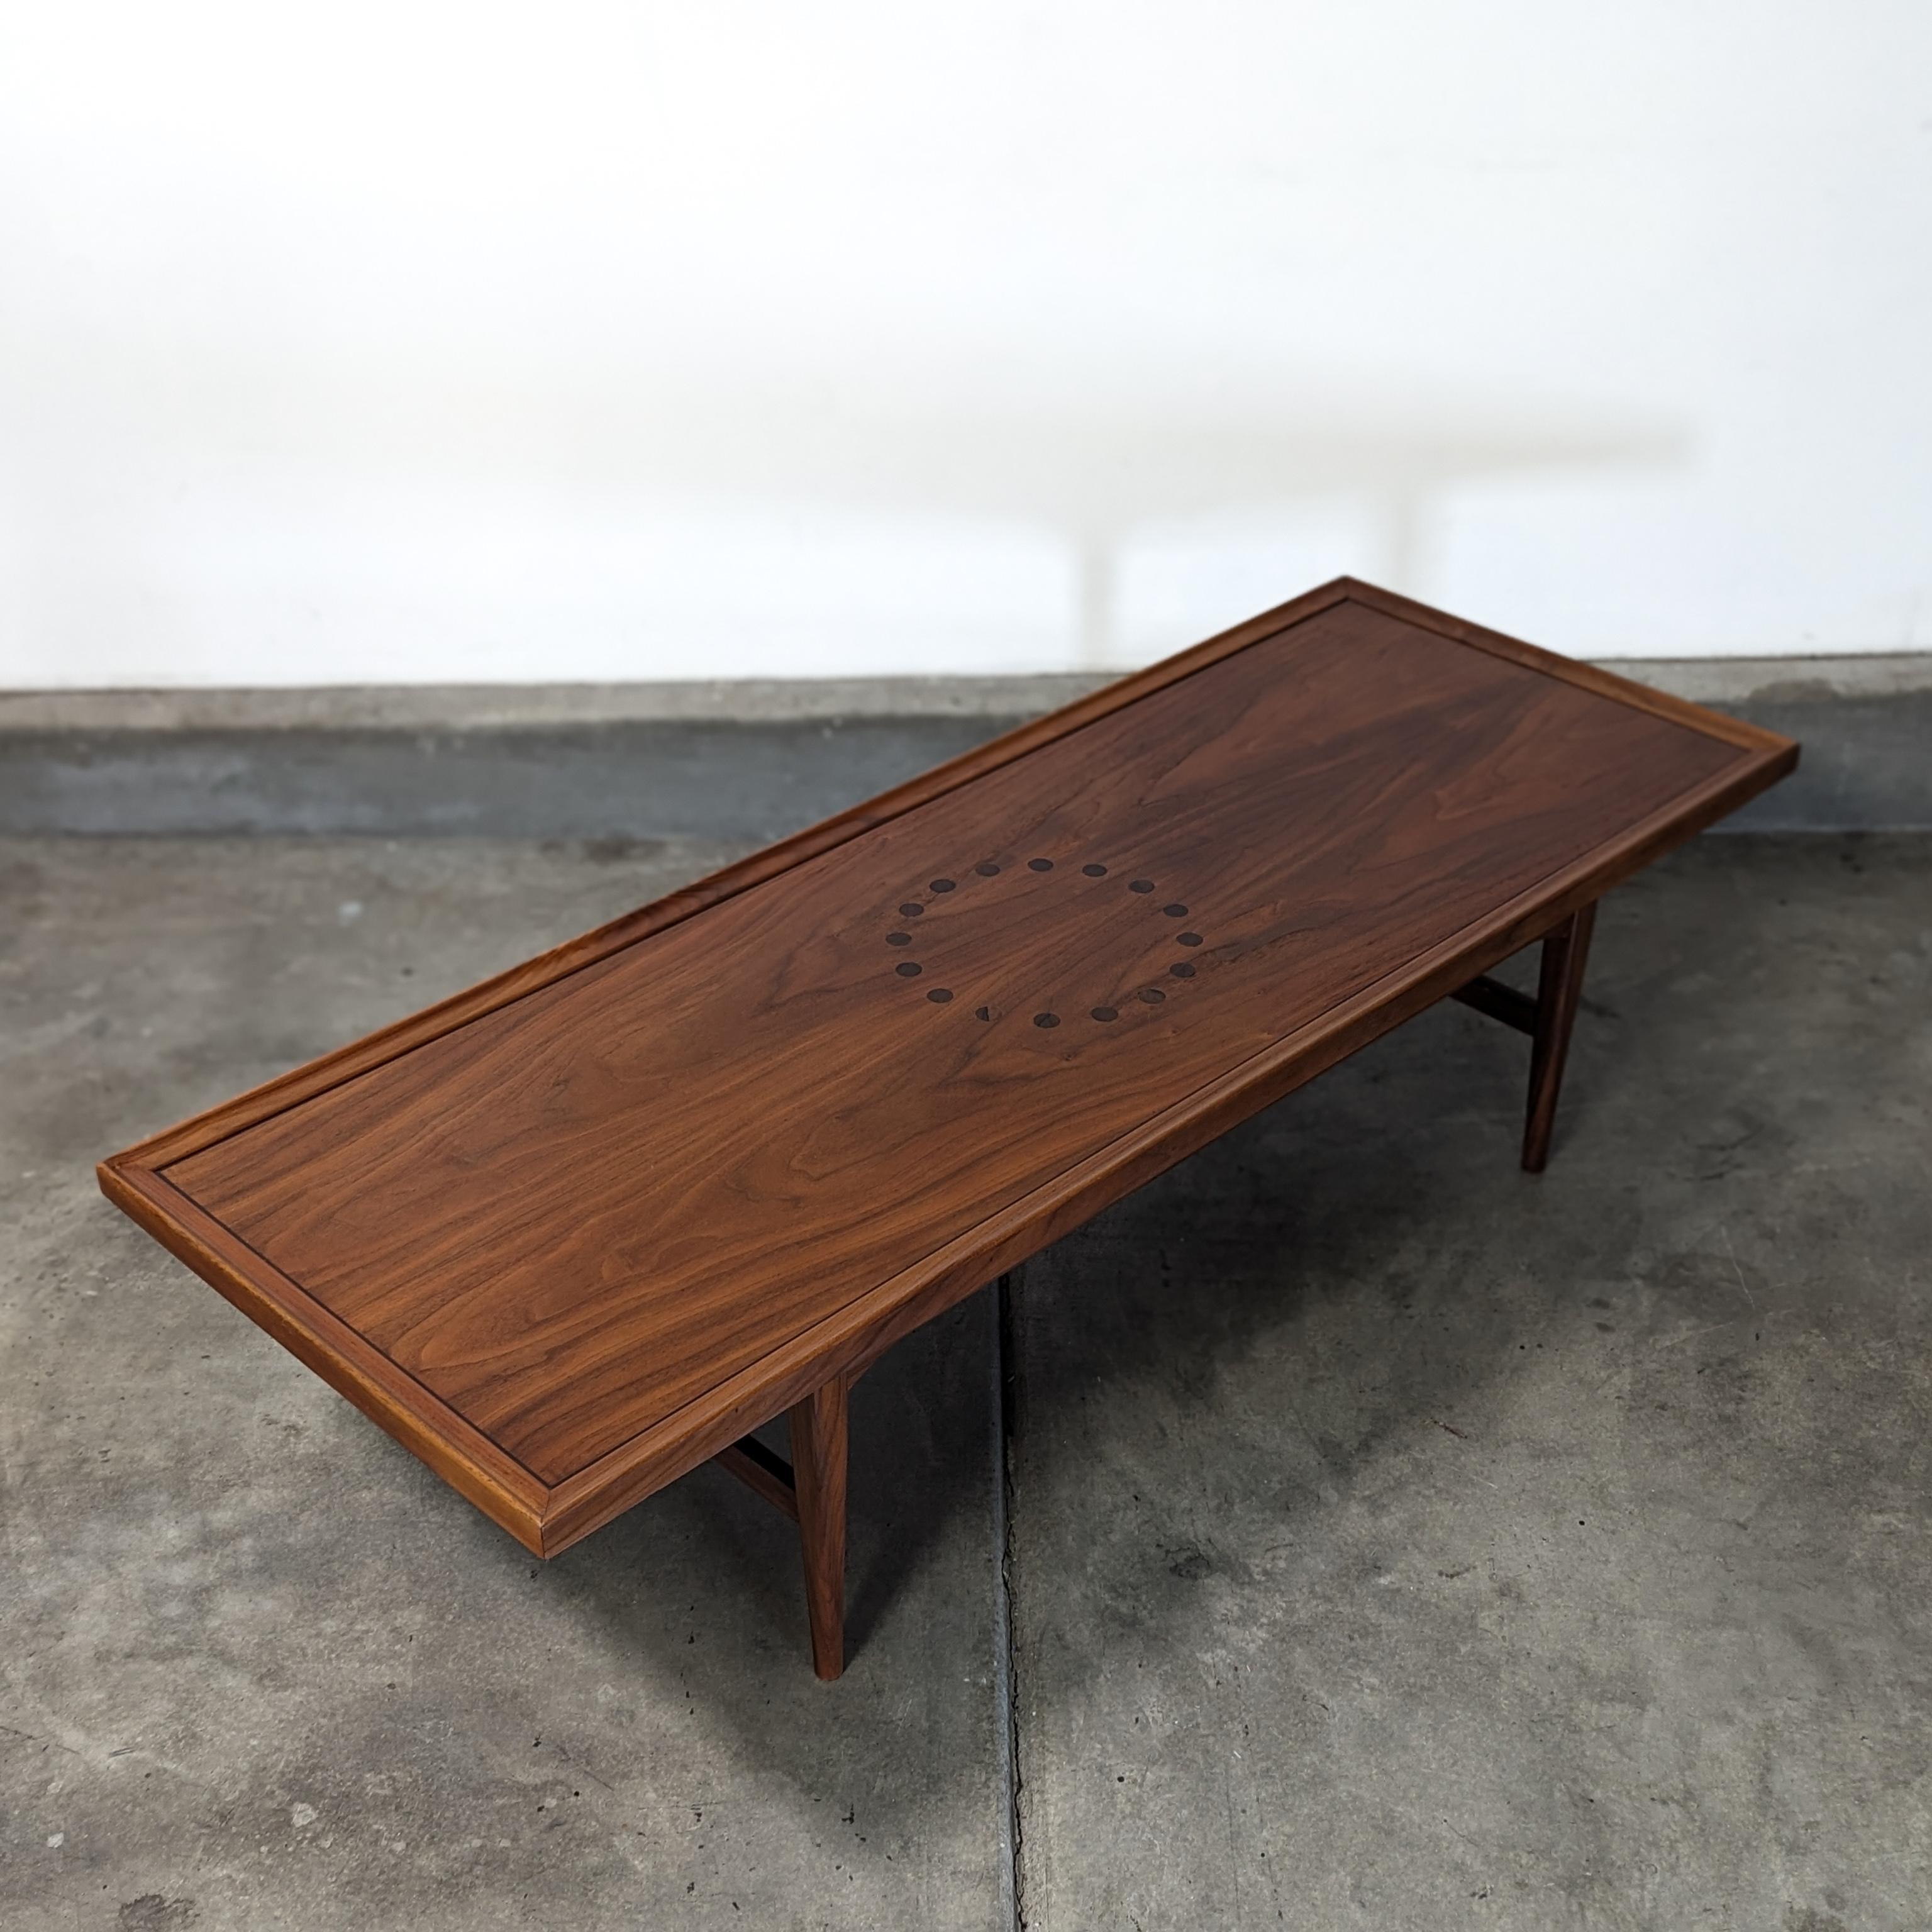 Step back in time and elevate your living space with this stunning vintage coffee table, a true gem designed by Stewart MacDougall and Kipp Stewart for the prestigious Drexel 'Declaration' line from the 1960s. This exquisite piece boasts a sleek